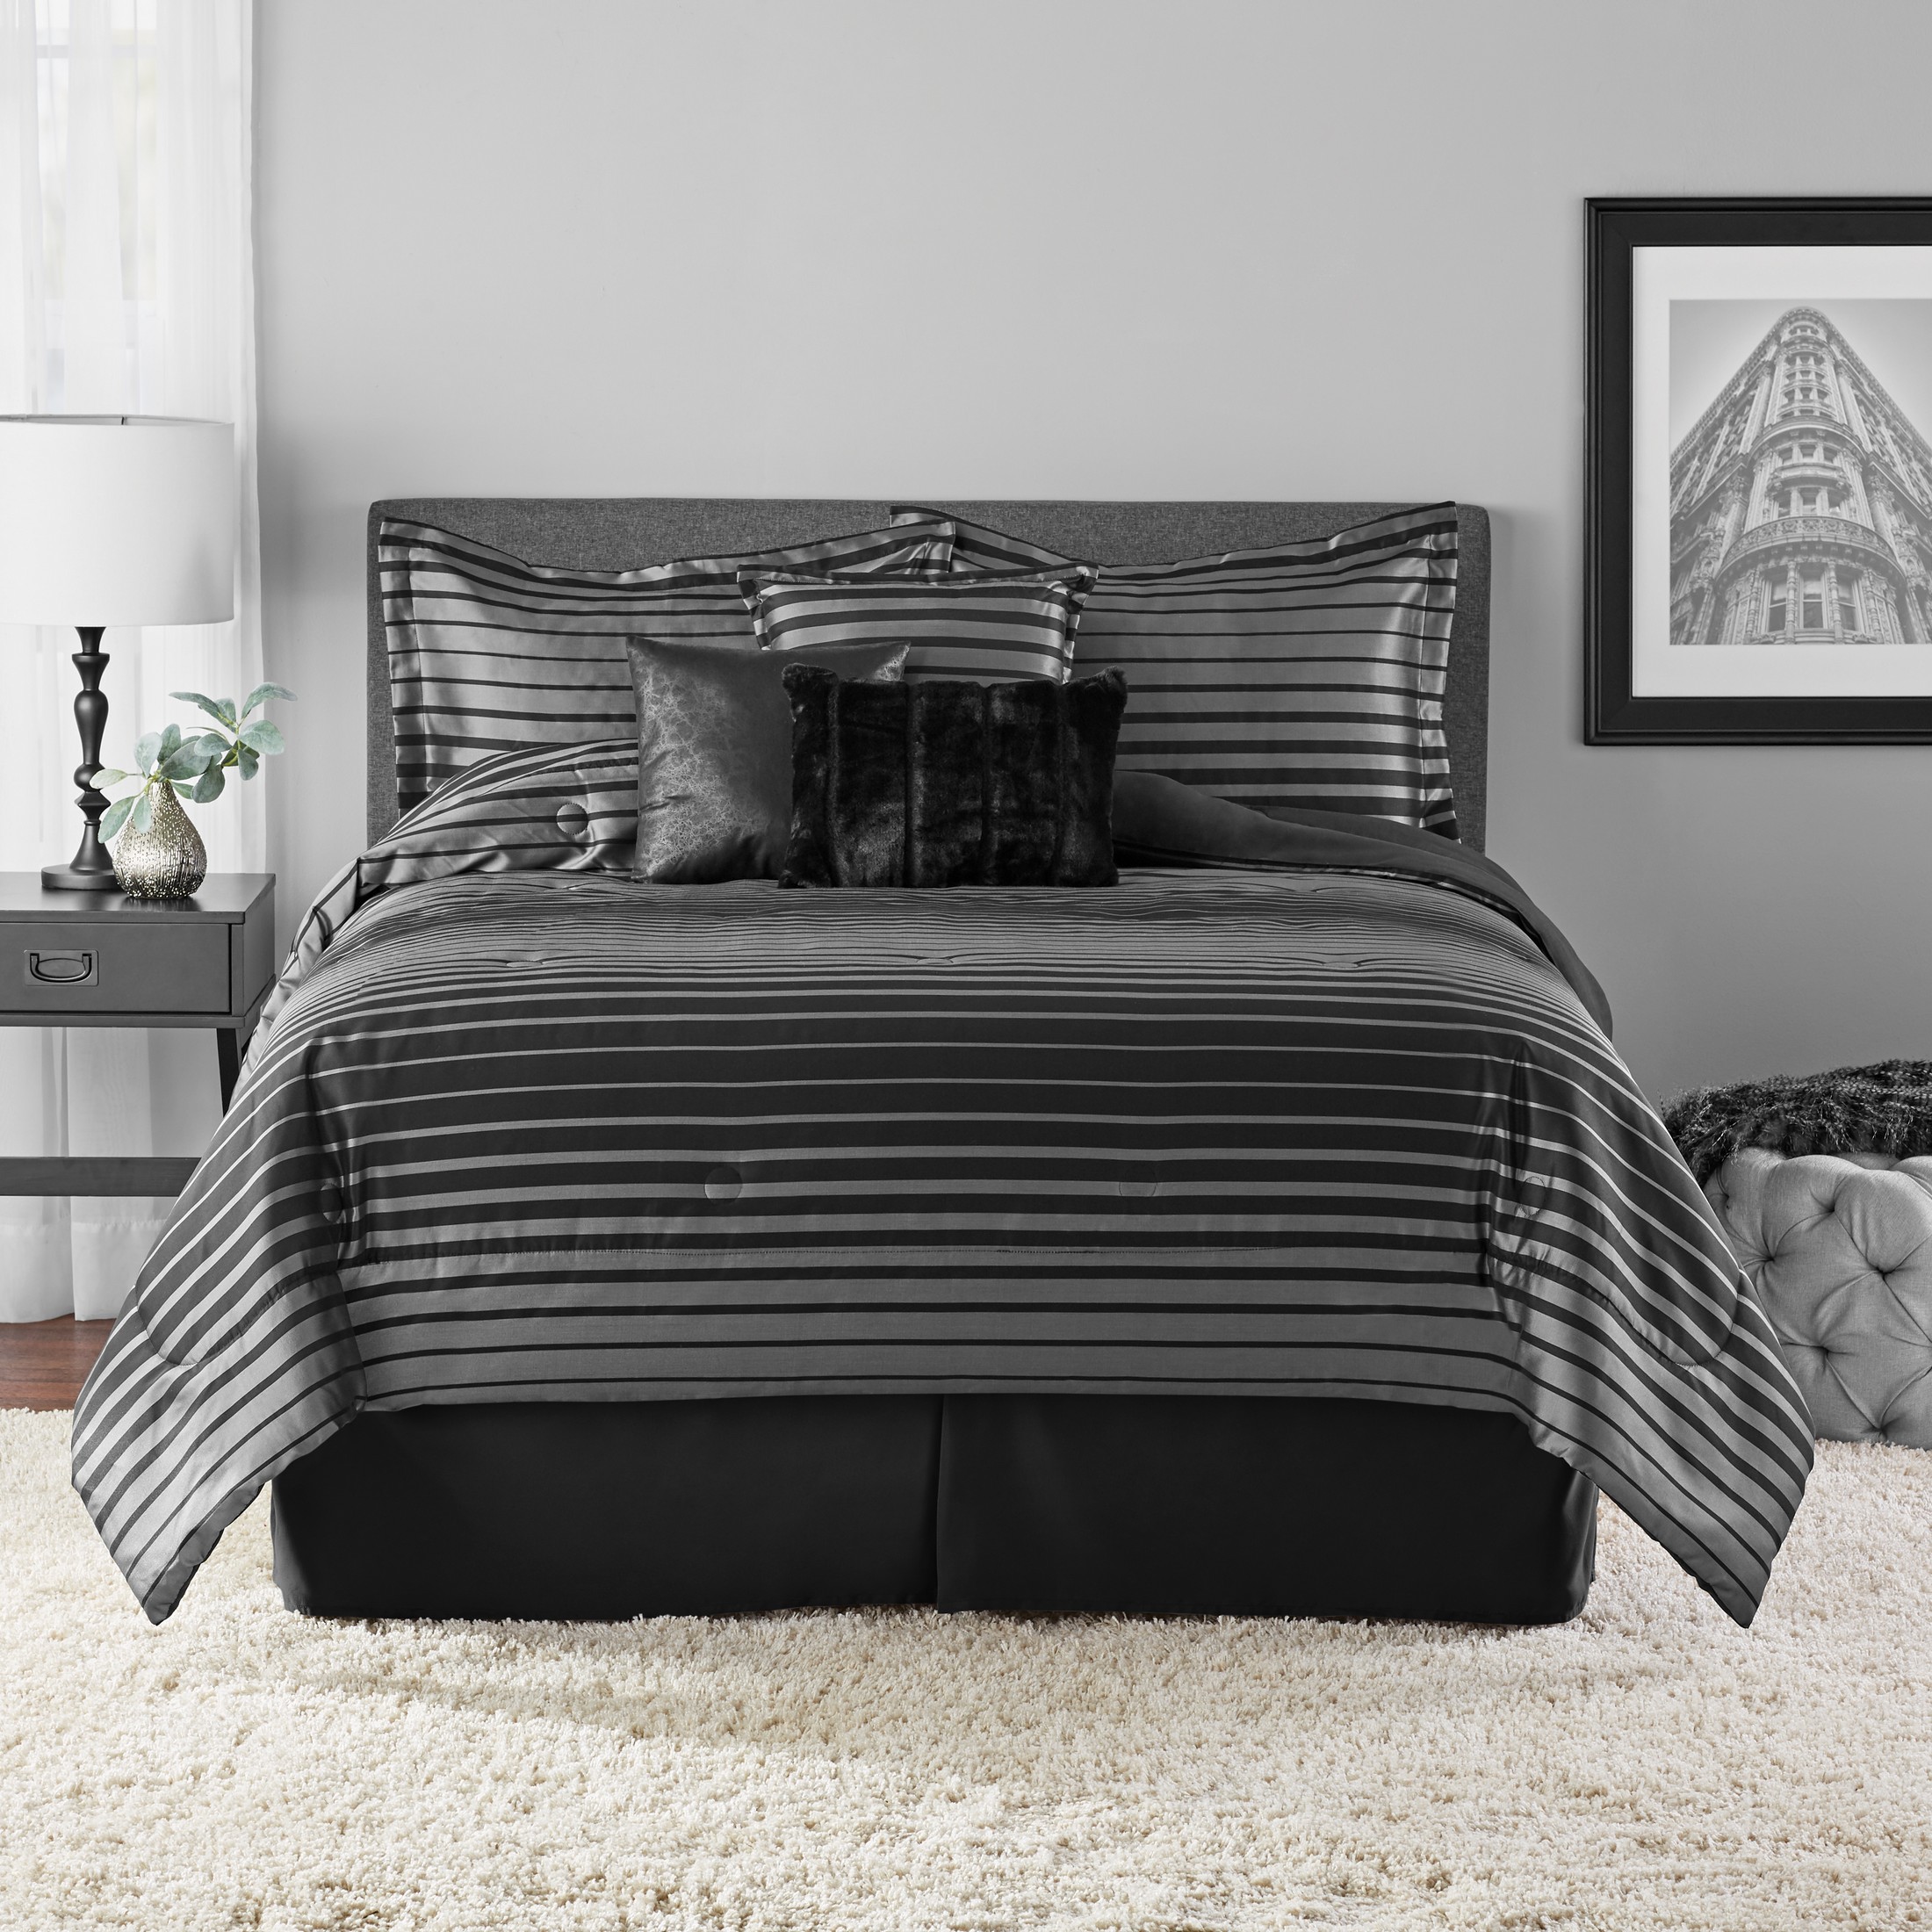 Mainstays 7-Piece Black Striped Midnight Woven Comforter Set, King - image 1 of 5